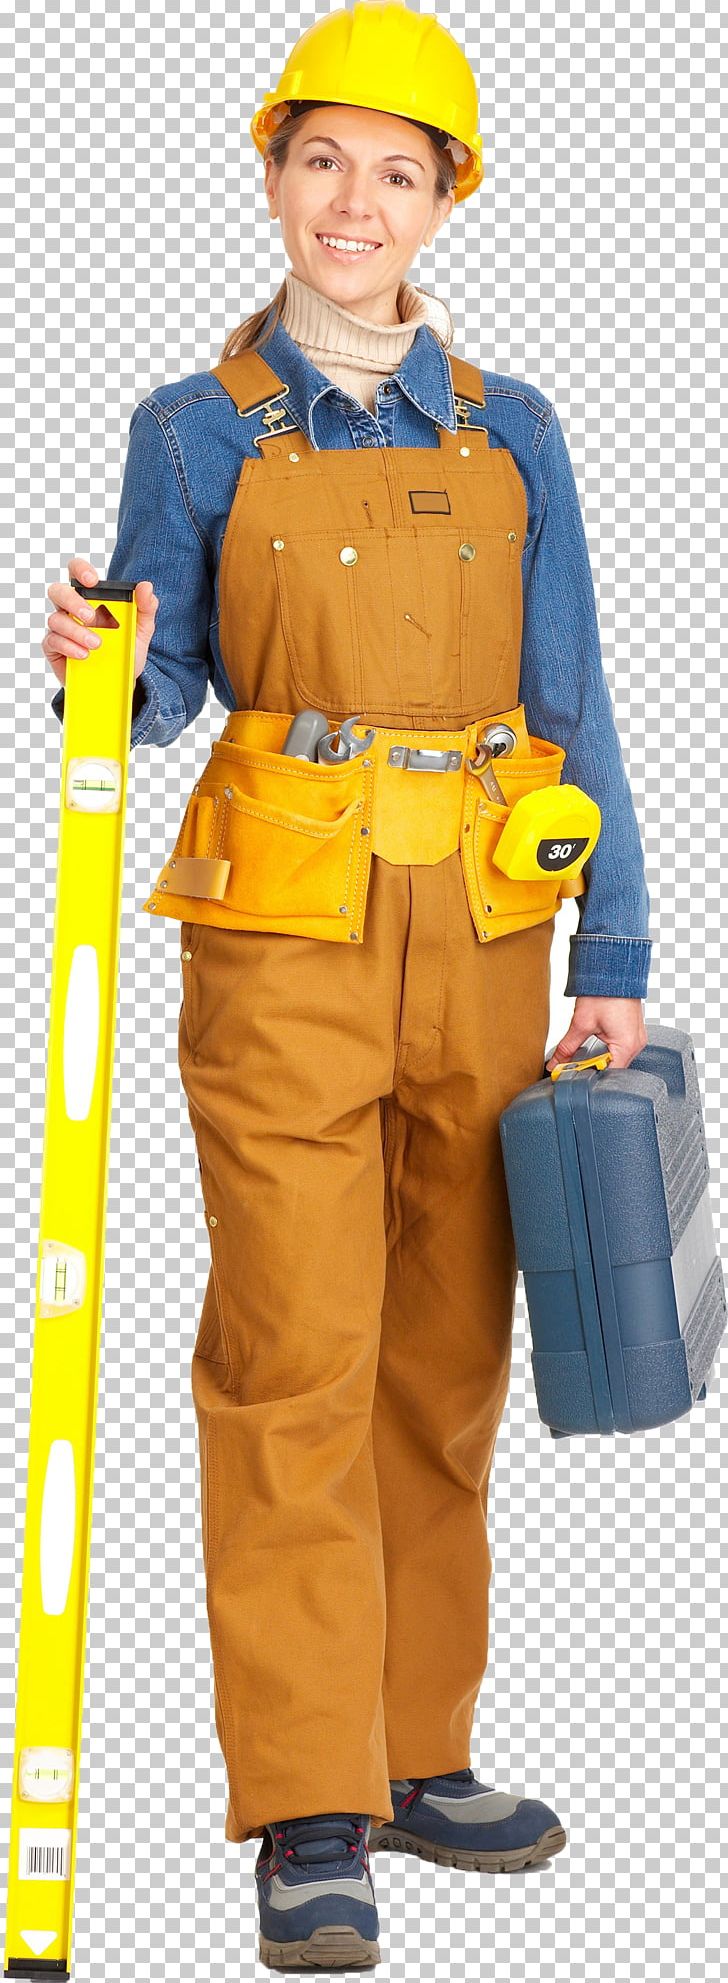 Architectural Engineering Industry Building Organization Company PNG, Clipart, Blue Collar Worker, Construction Foreman, Construction Worker, Costume, Customer Free PNG Download